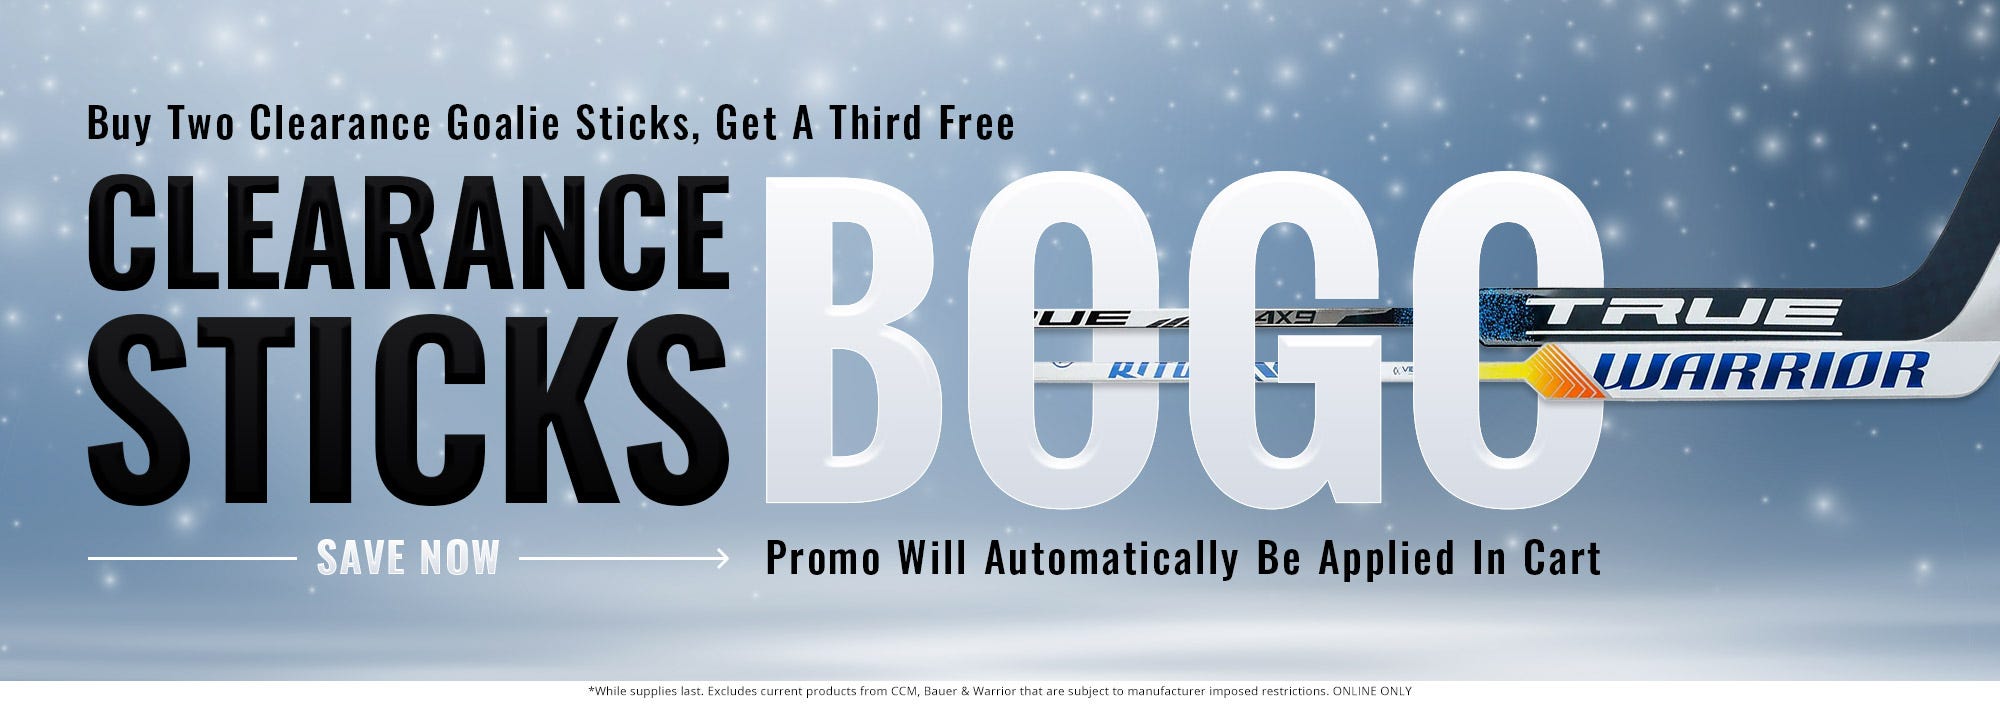 Cyber Monday: Buy Two Clearance Sticks, Get A Third Free